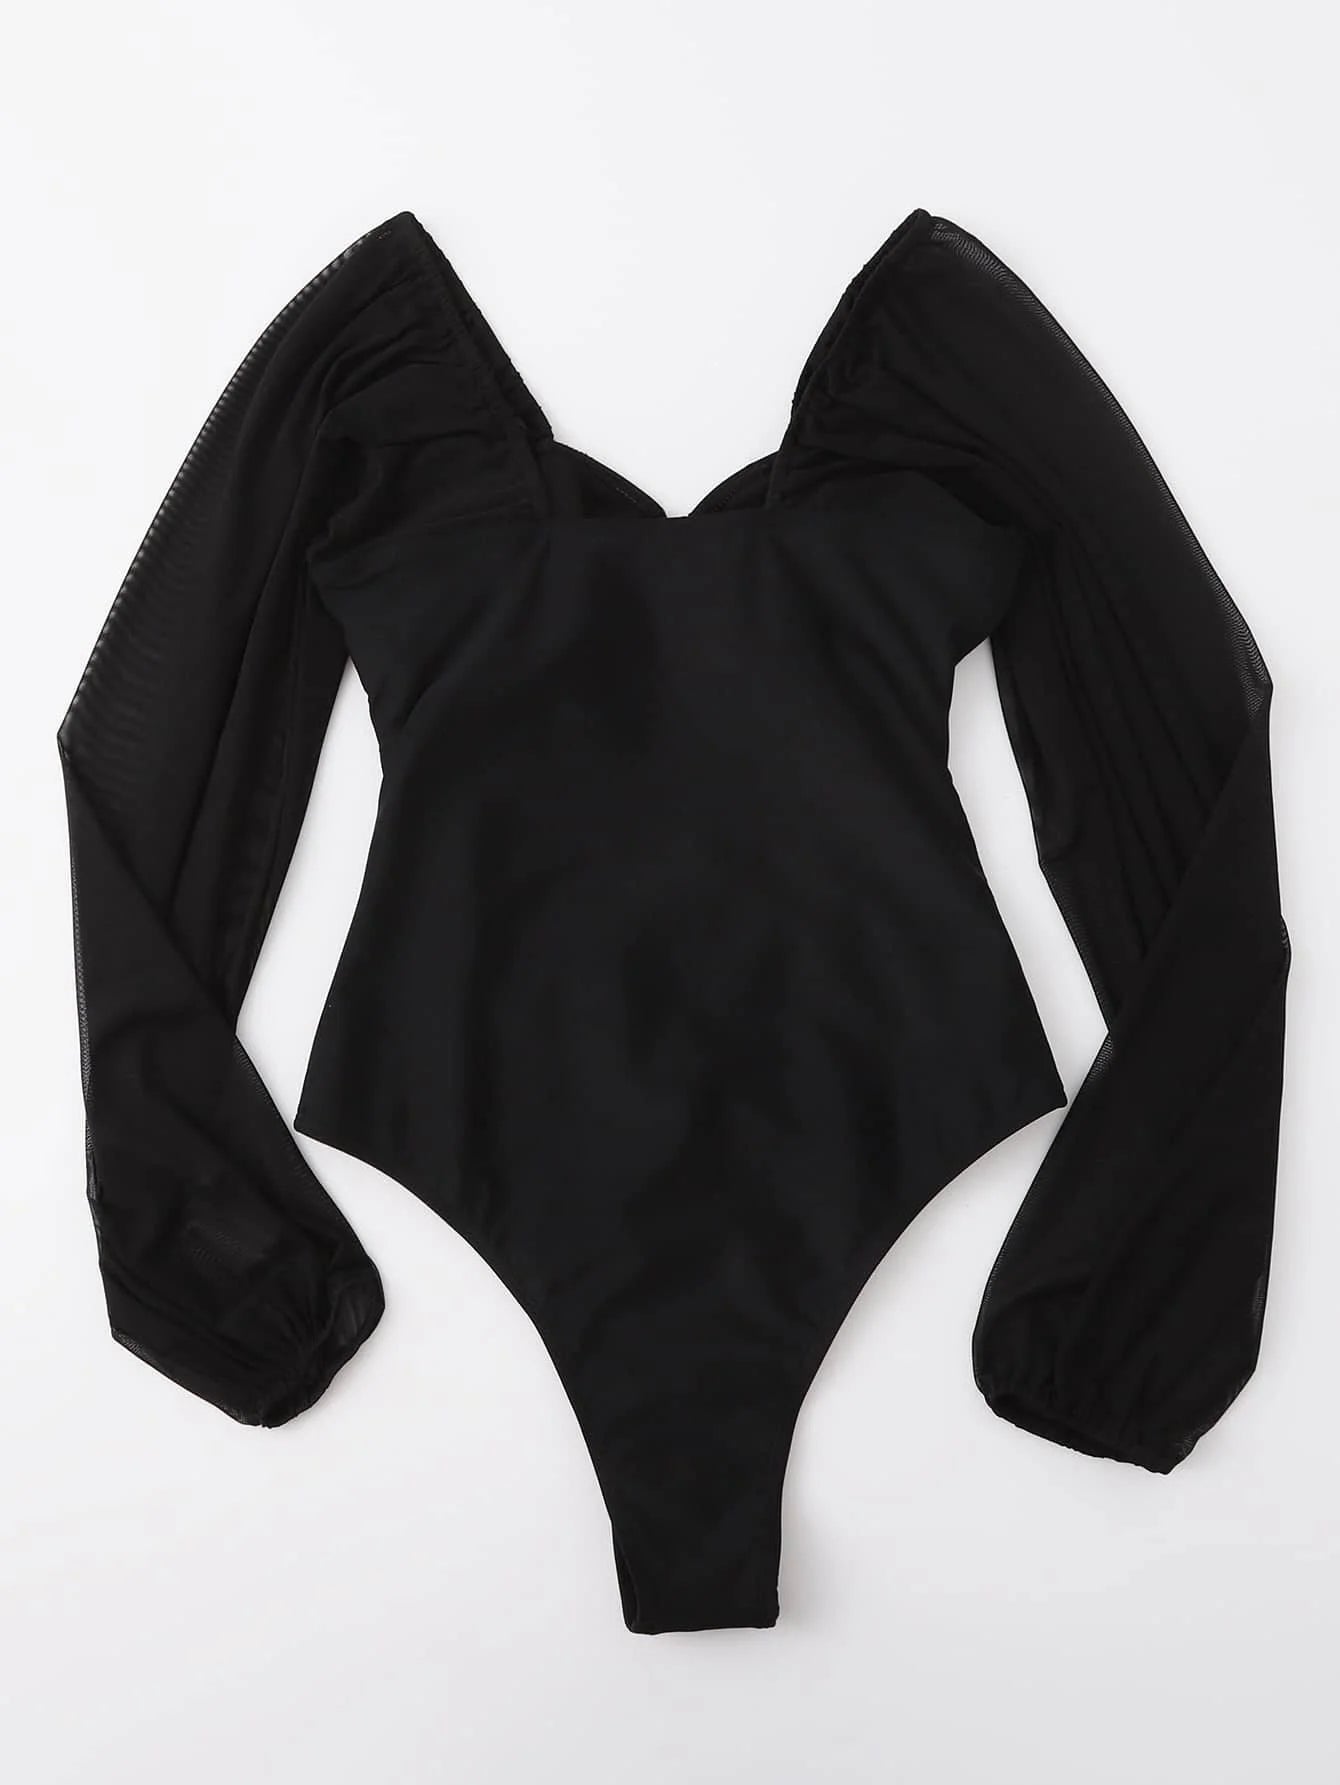 Black One Piece Swimsuit with Long Sheer Sleeves